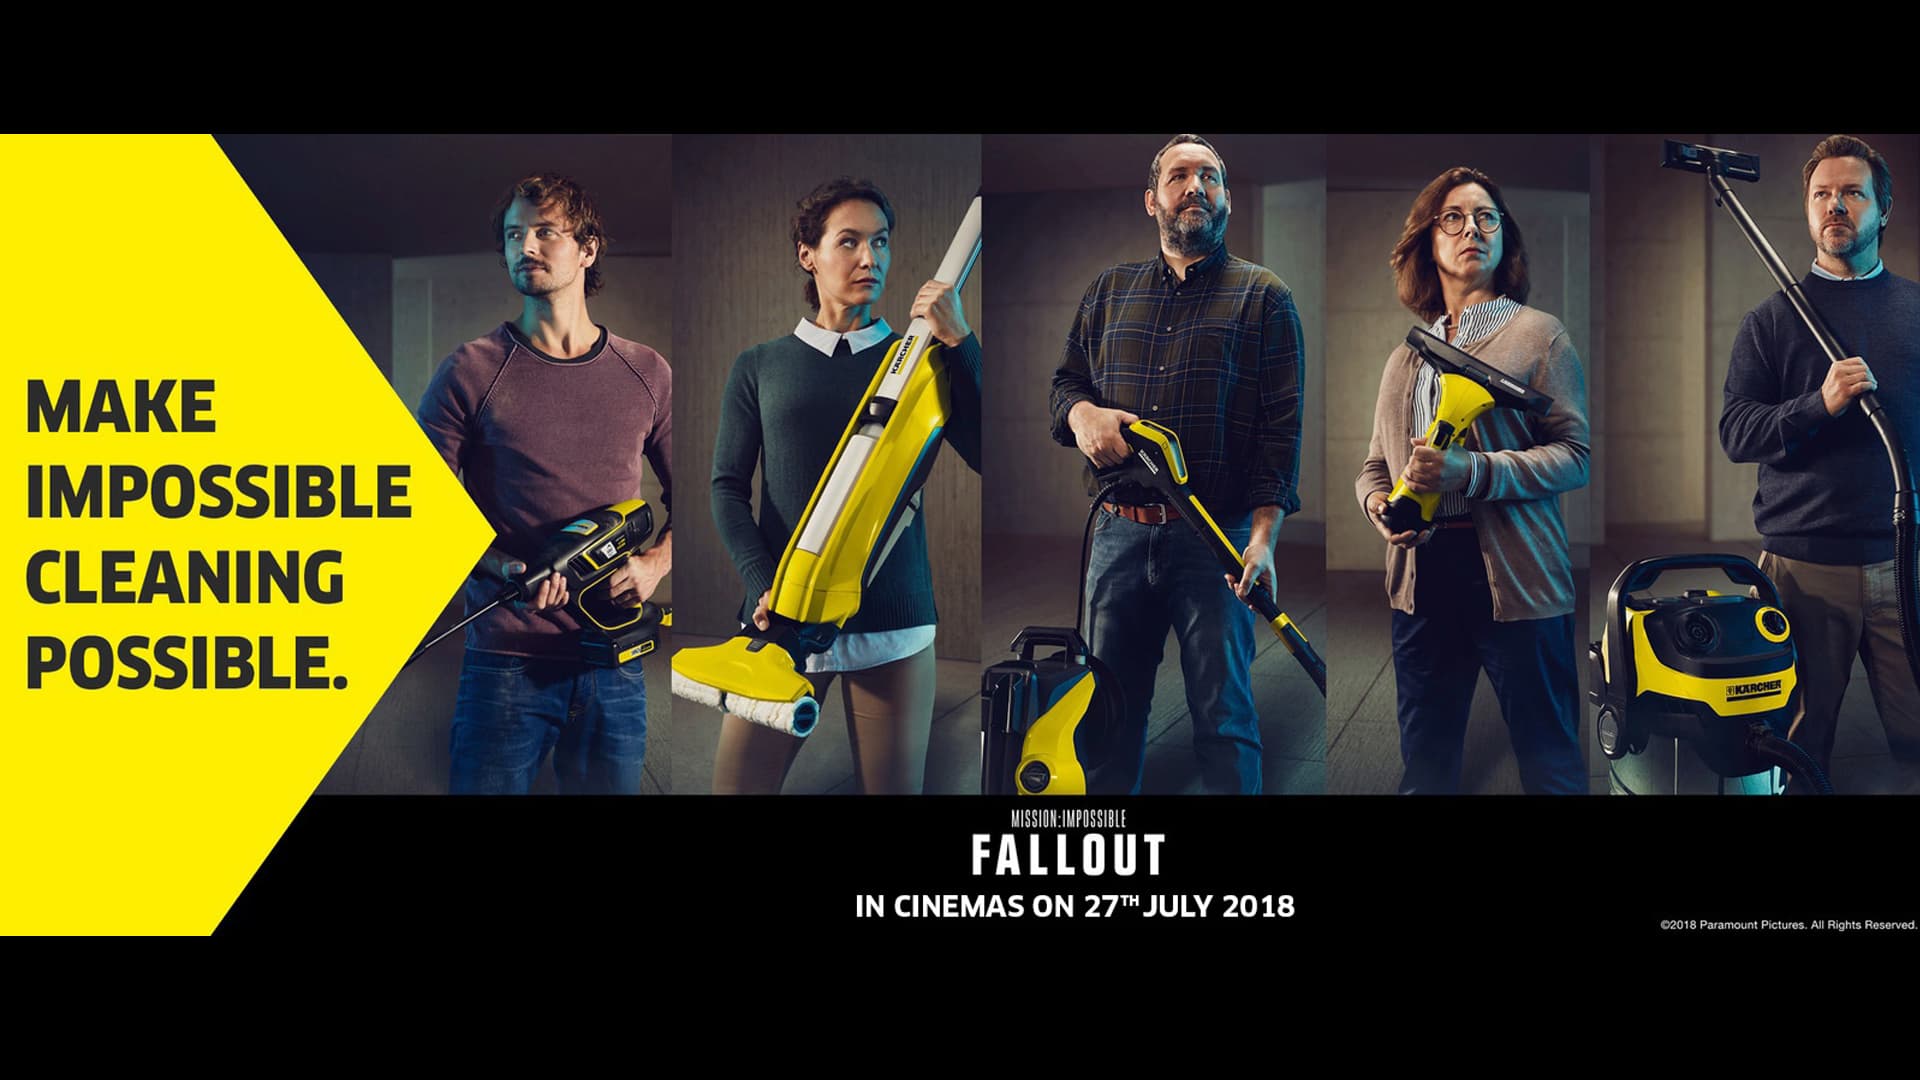 Mission Impossible: FallOut Karcher poster